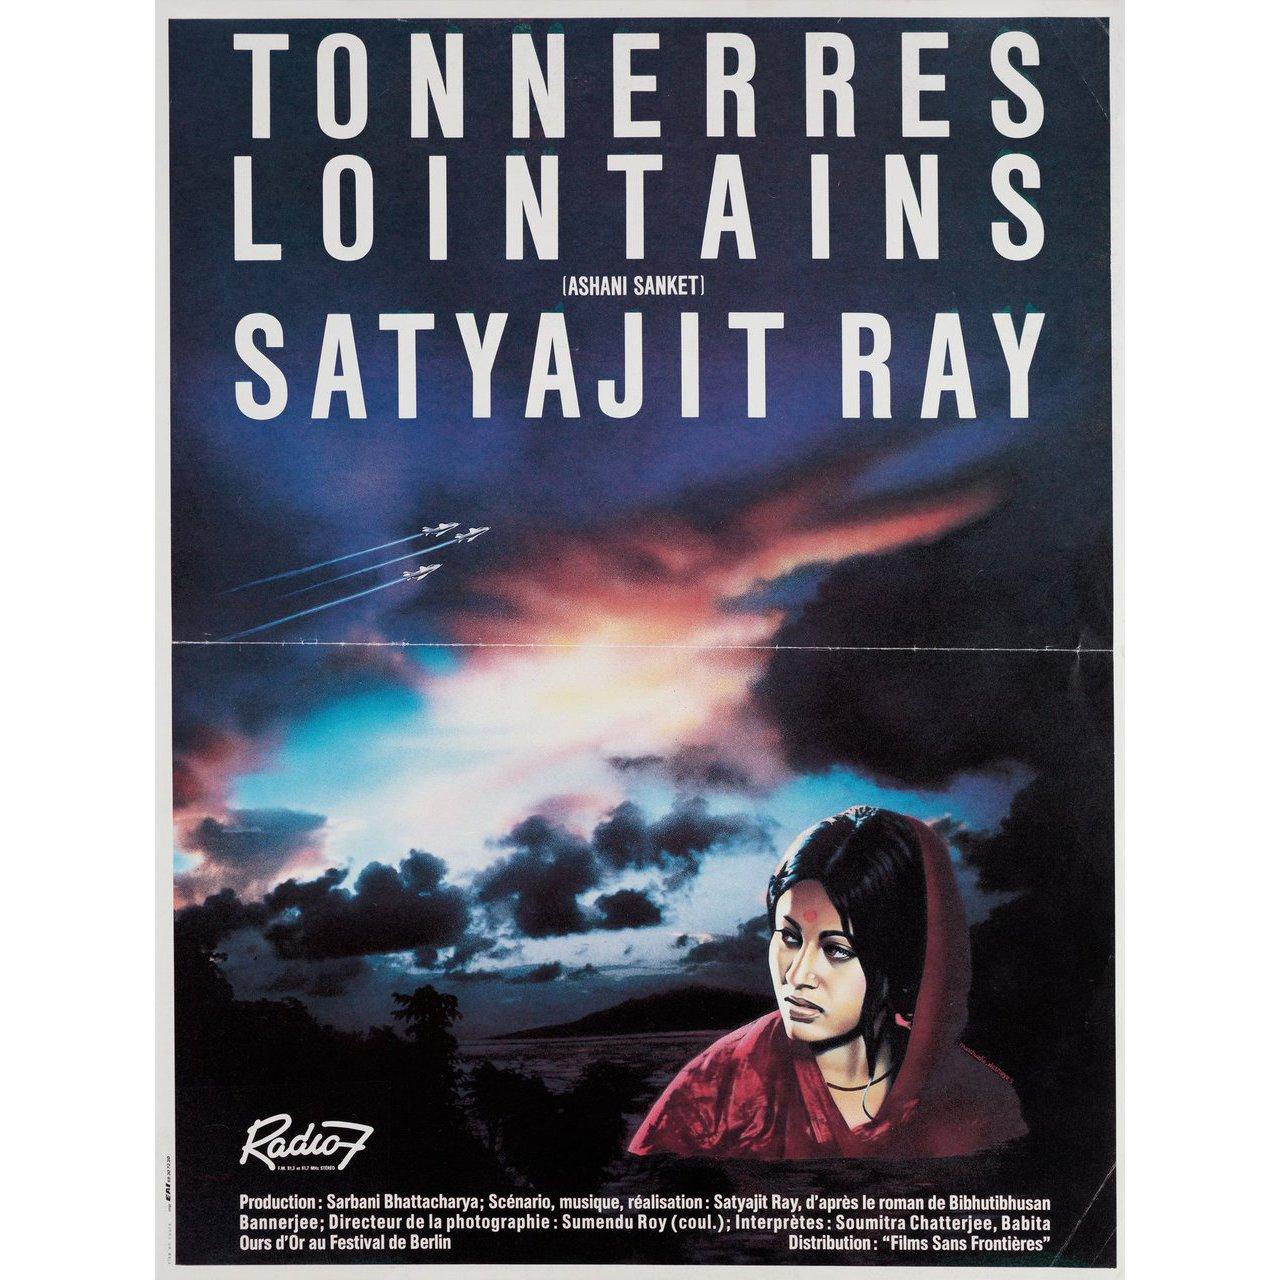 Original 1985 French petite poster for the first French theatrical release of the 1973 film Distant Thunder (Ashani Sanket) directed by Satyajit Ray with Soumitra Chatterjee / Babita Kapoor / Sandhya Roy / Chitra Banerjee. Very Good-Fine condition,